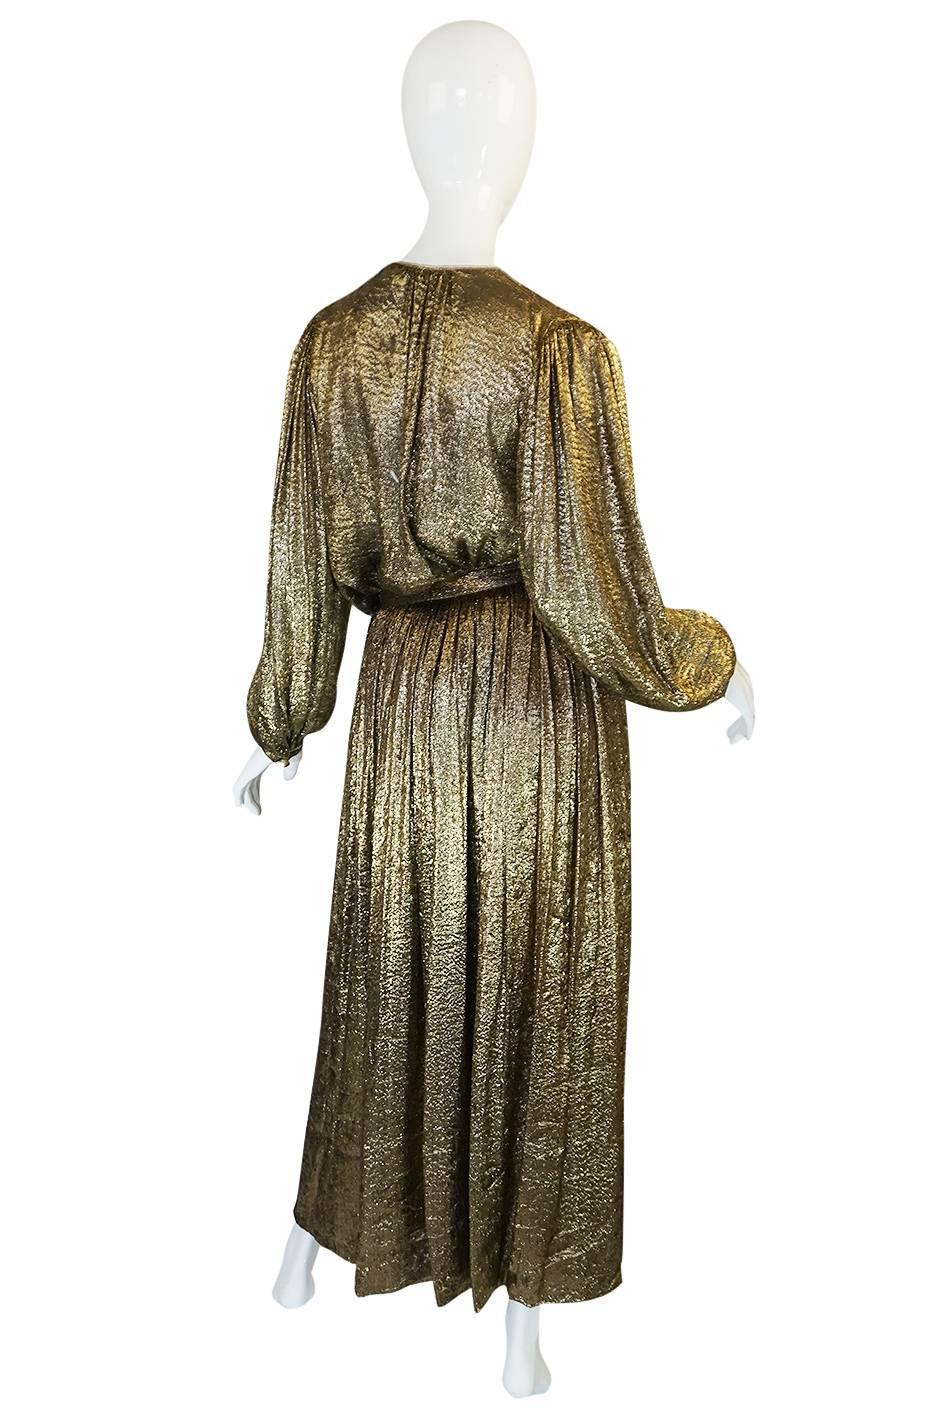 The almost identical ensemble to this one was recently featured in the exhibit Yves Saint Laurent + Halston: Fashioning the 70s and is featured in the accompanying book for the exhibit giving us a firm date and making it well documented.

This